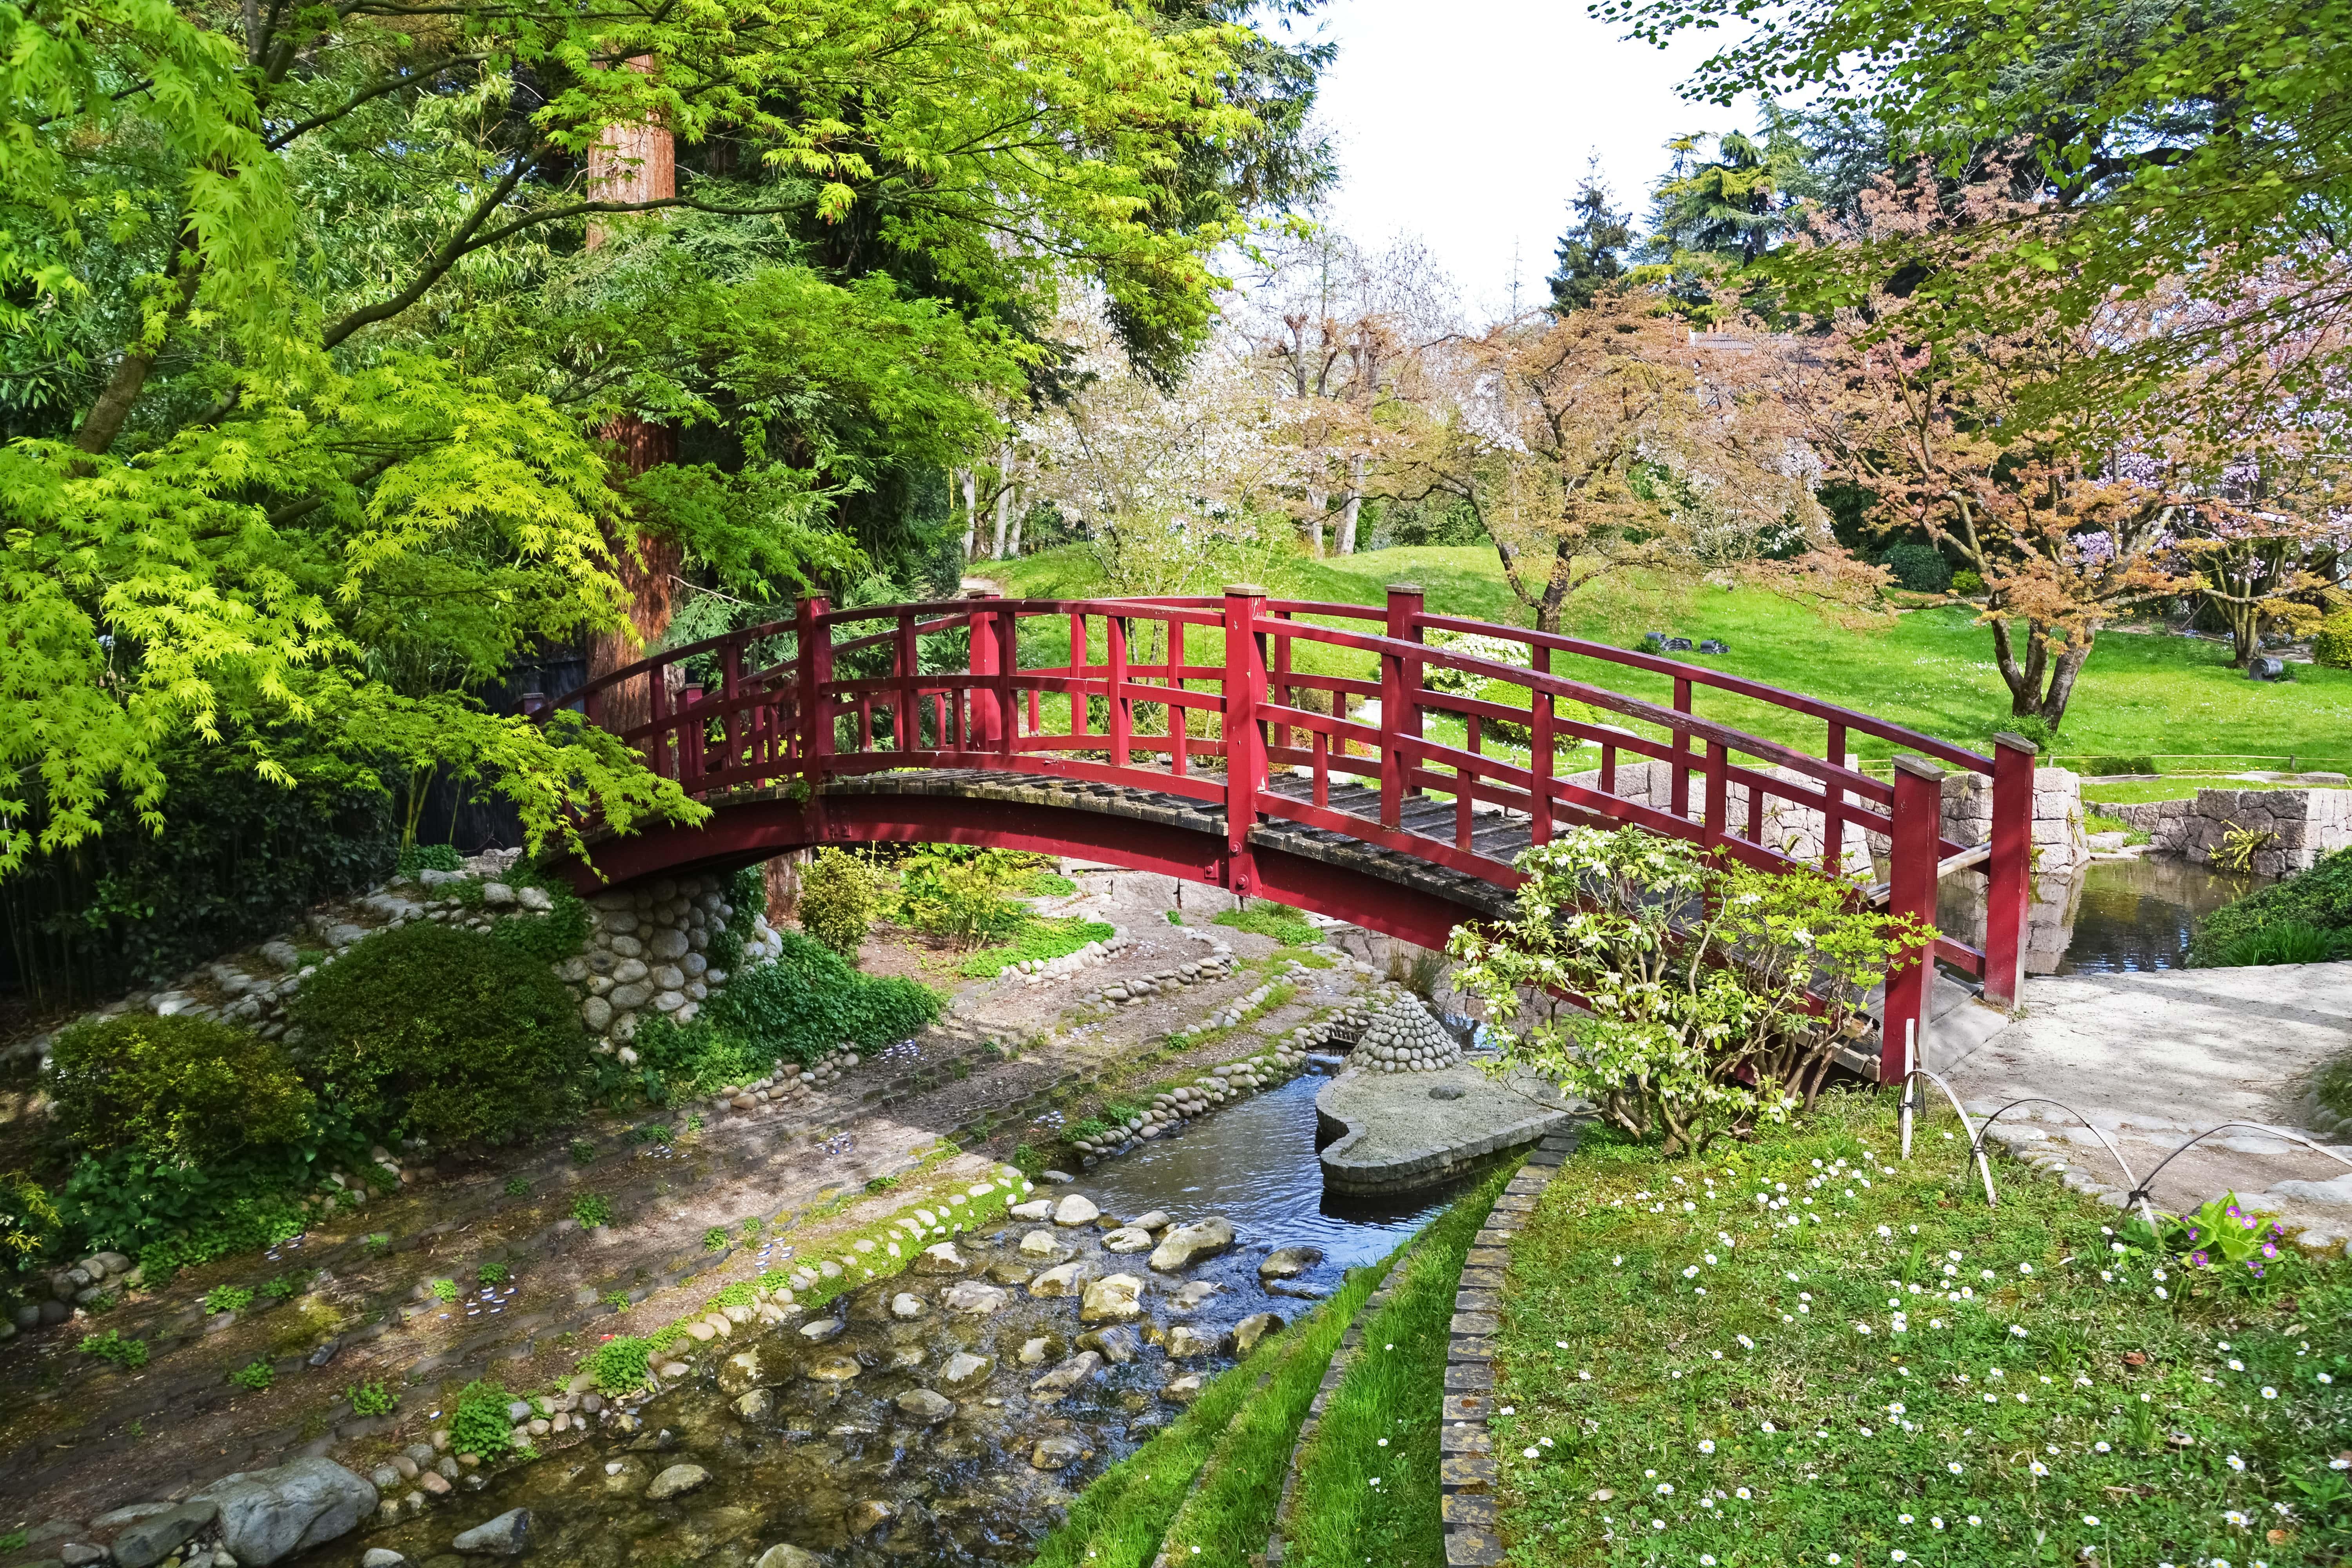 A short red bridge over a shallow stream with bright green grass and leafy trees in the landscape